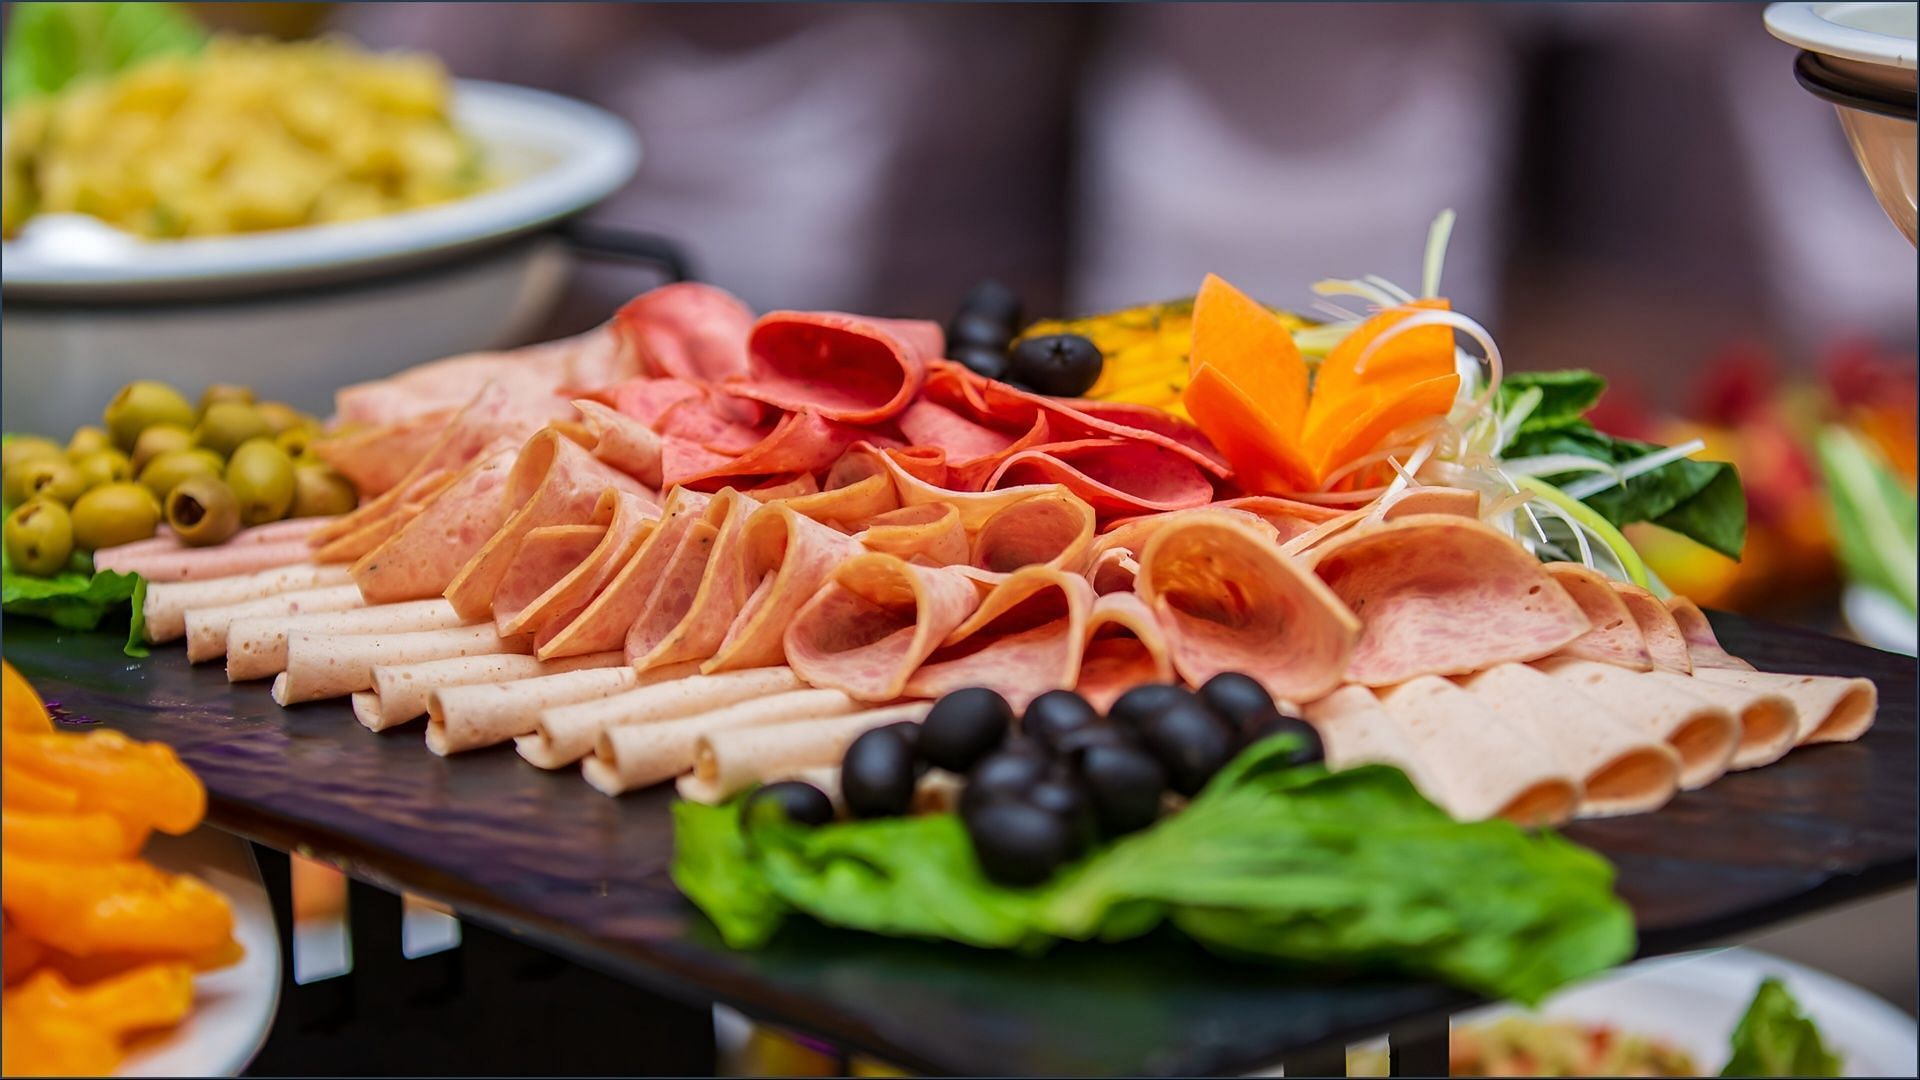 The affected Charcuterie Meat products may lead to foodborne illnesses upon consumption (Image via Mantaz31 / Pixabay)